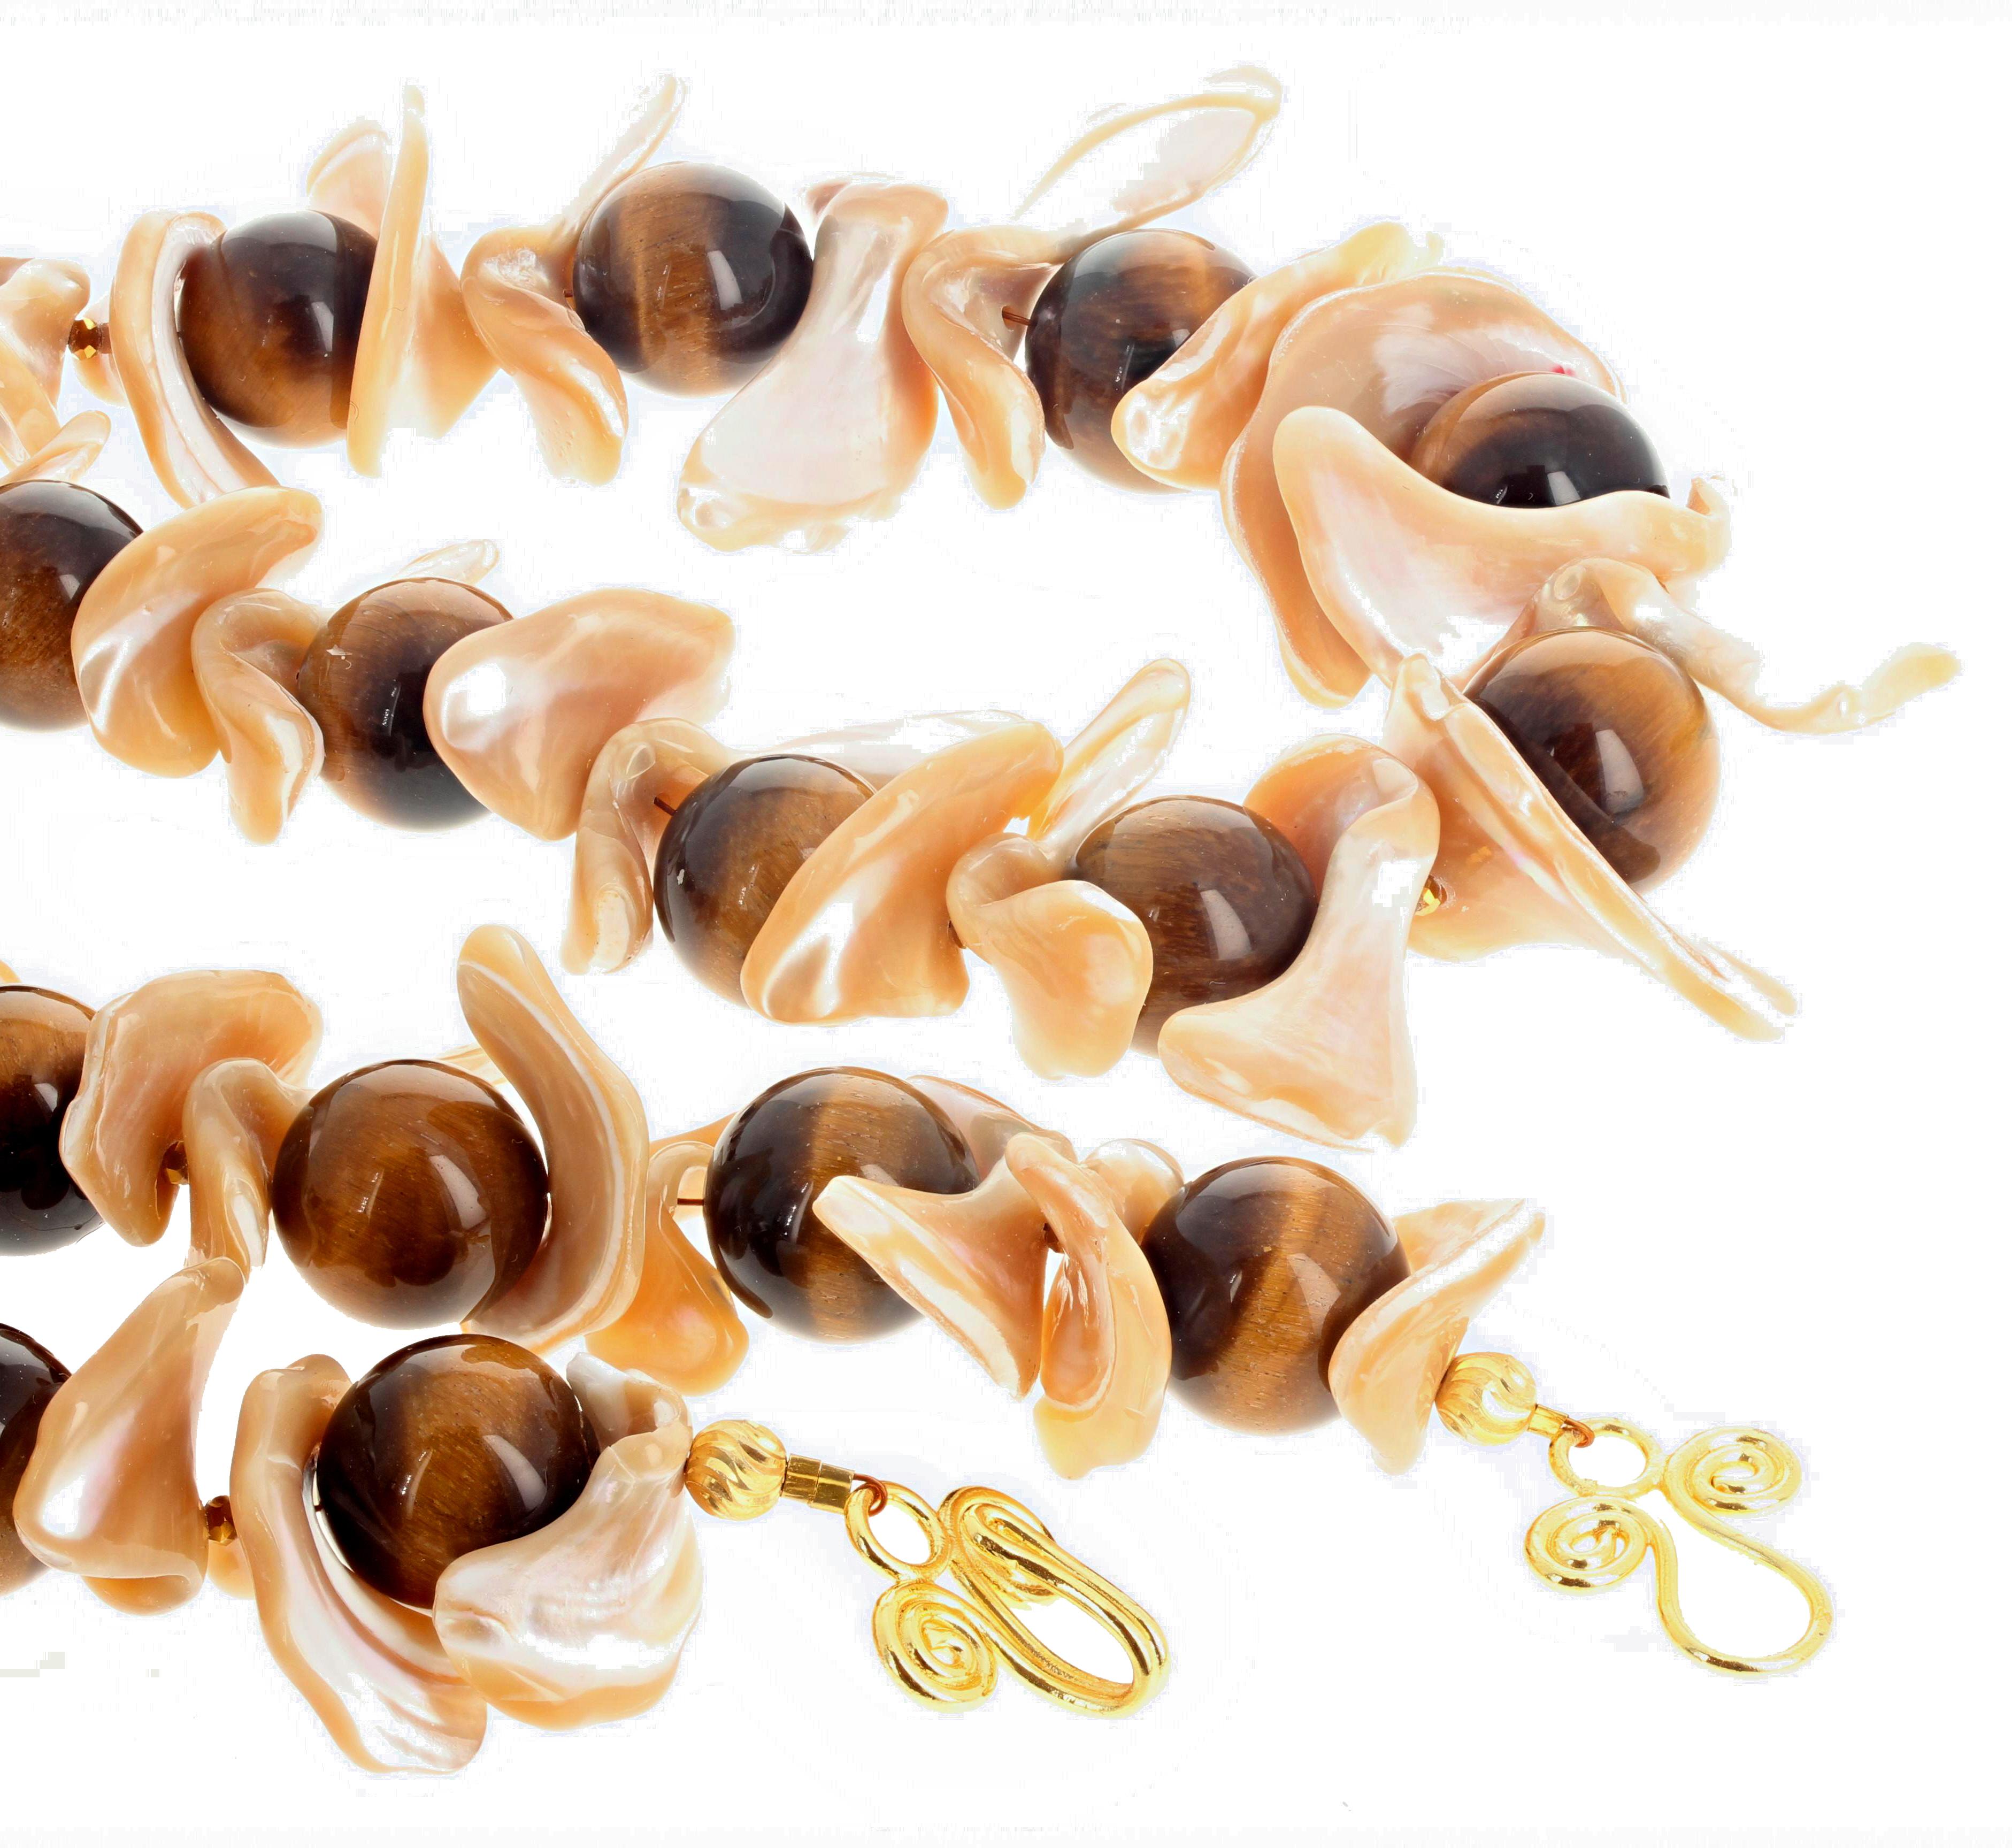 AJD Dramatic Artistic Natural Glowing Pearl Shells & Tiger Eye Bead Necklace In New Condition For Sale In Raleigh, NC